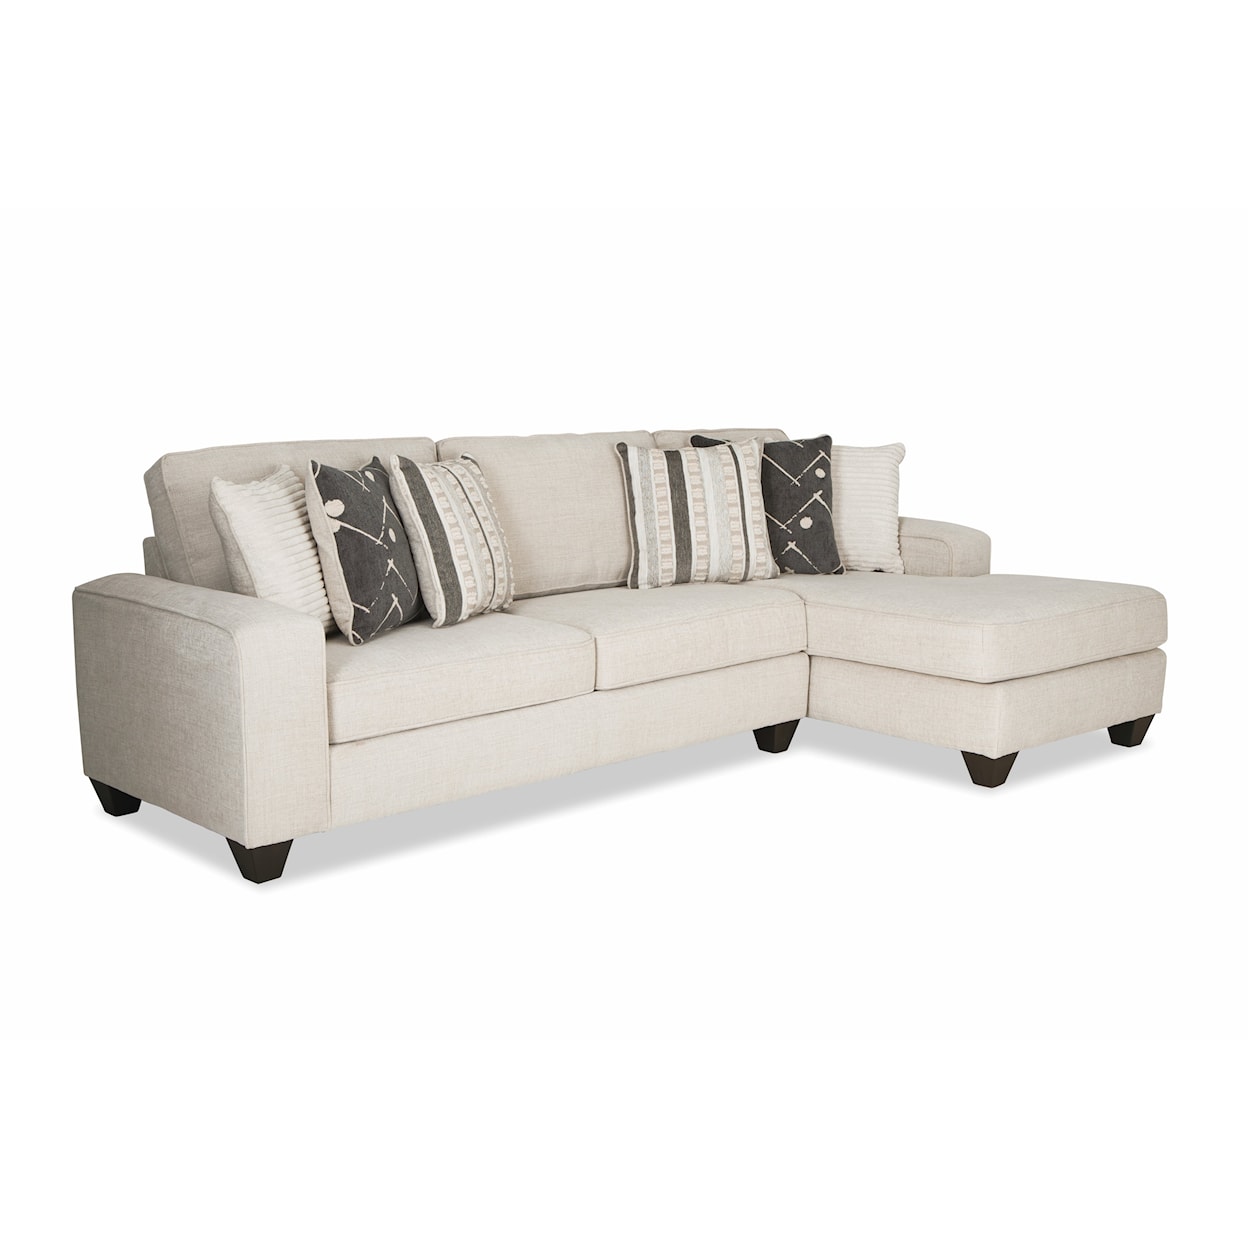 Albany 0462 2PC BEIGE RAF CHAISE SECTIONAL